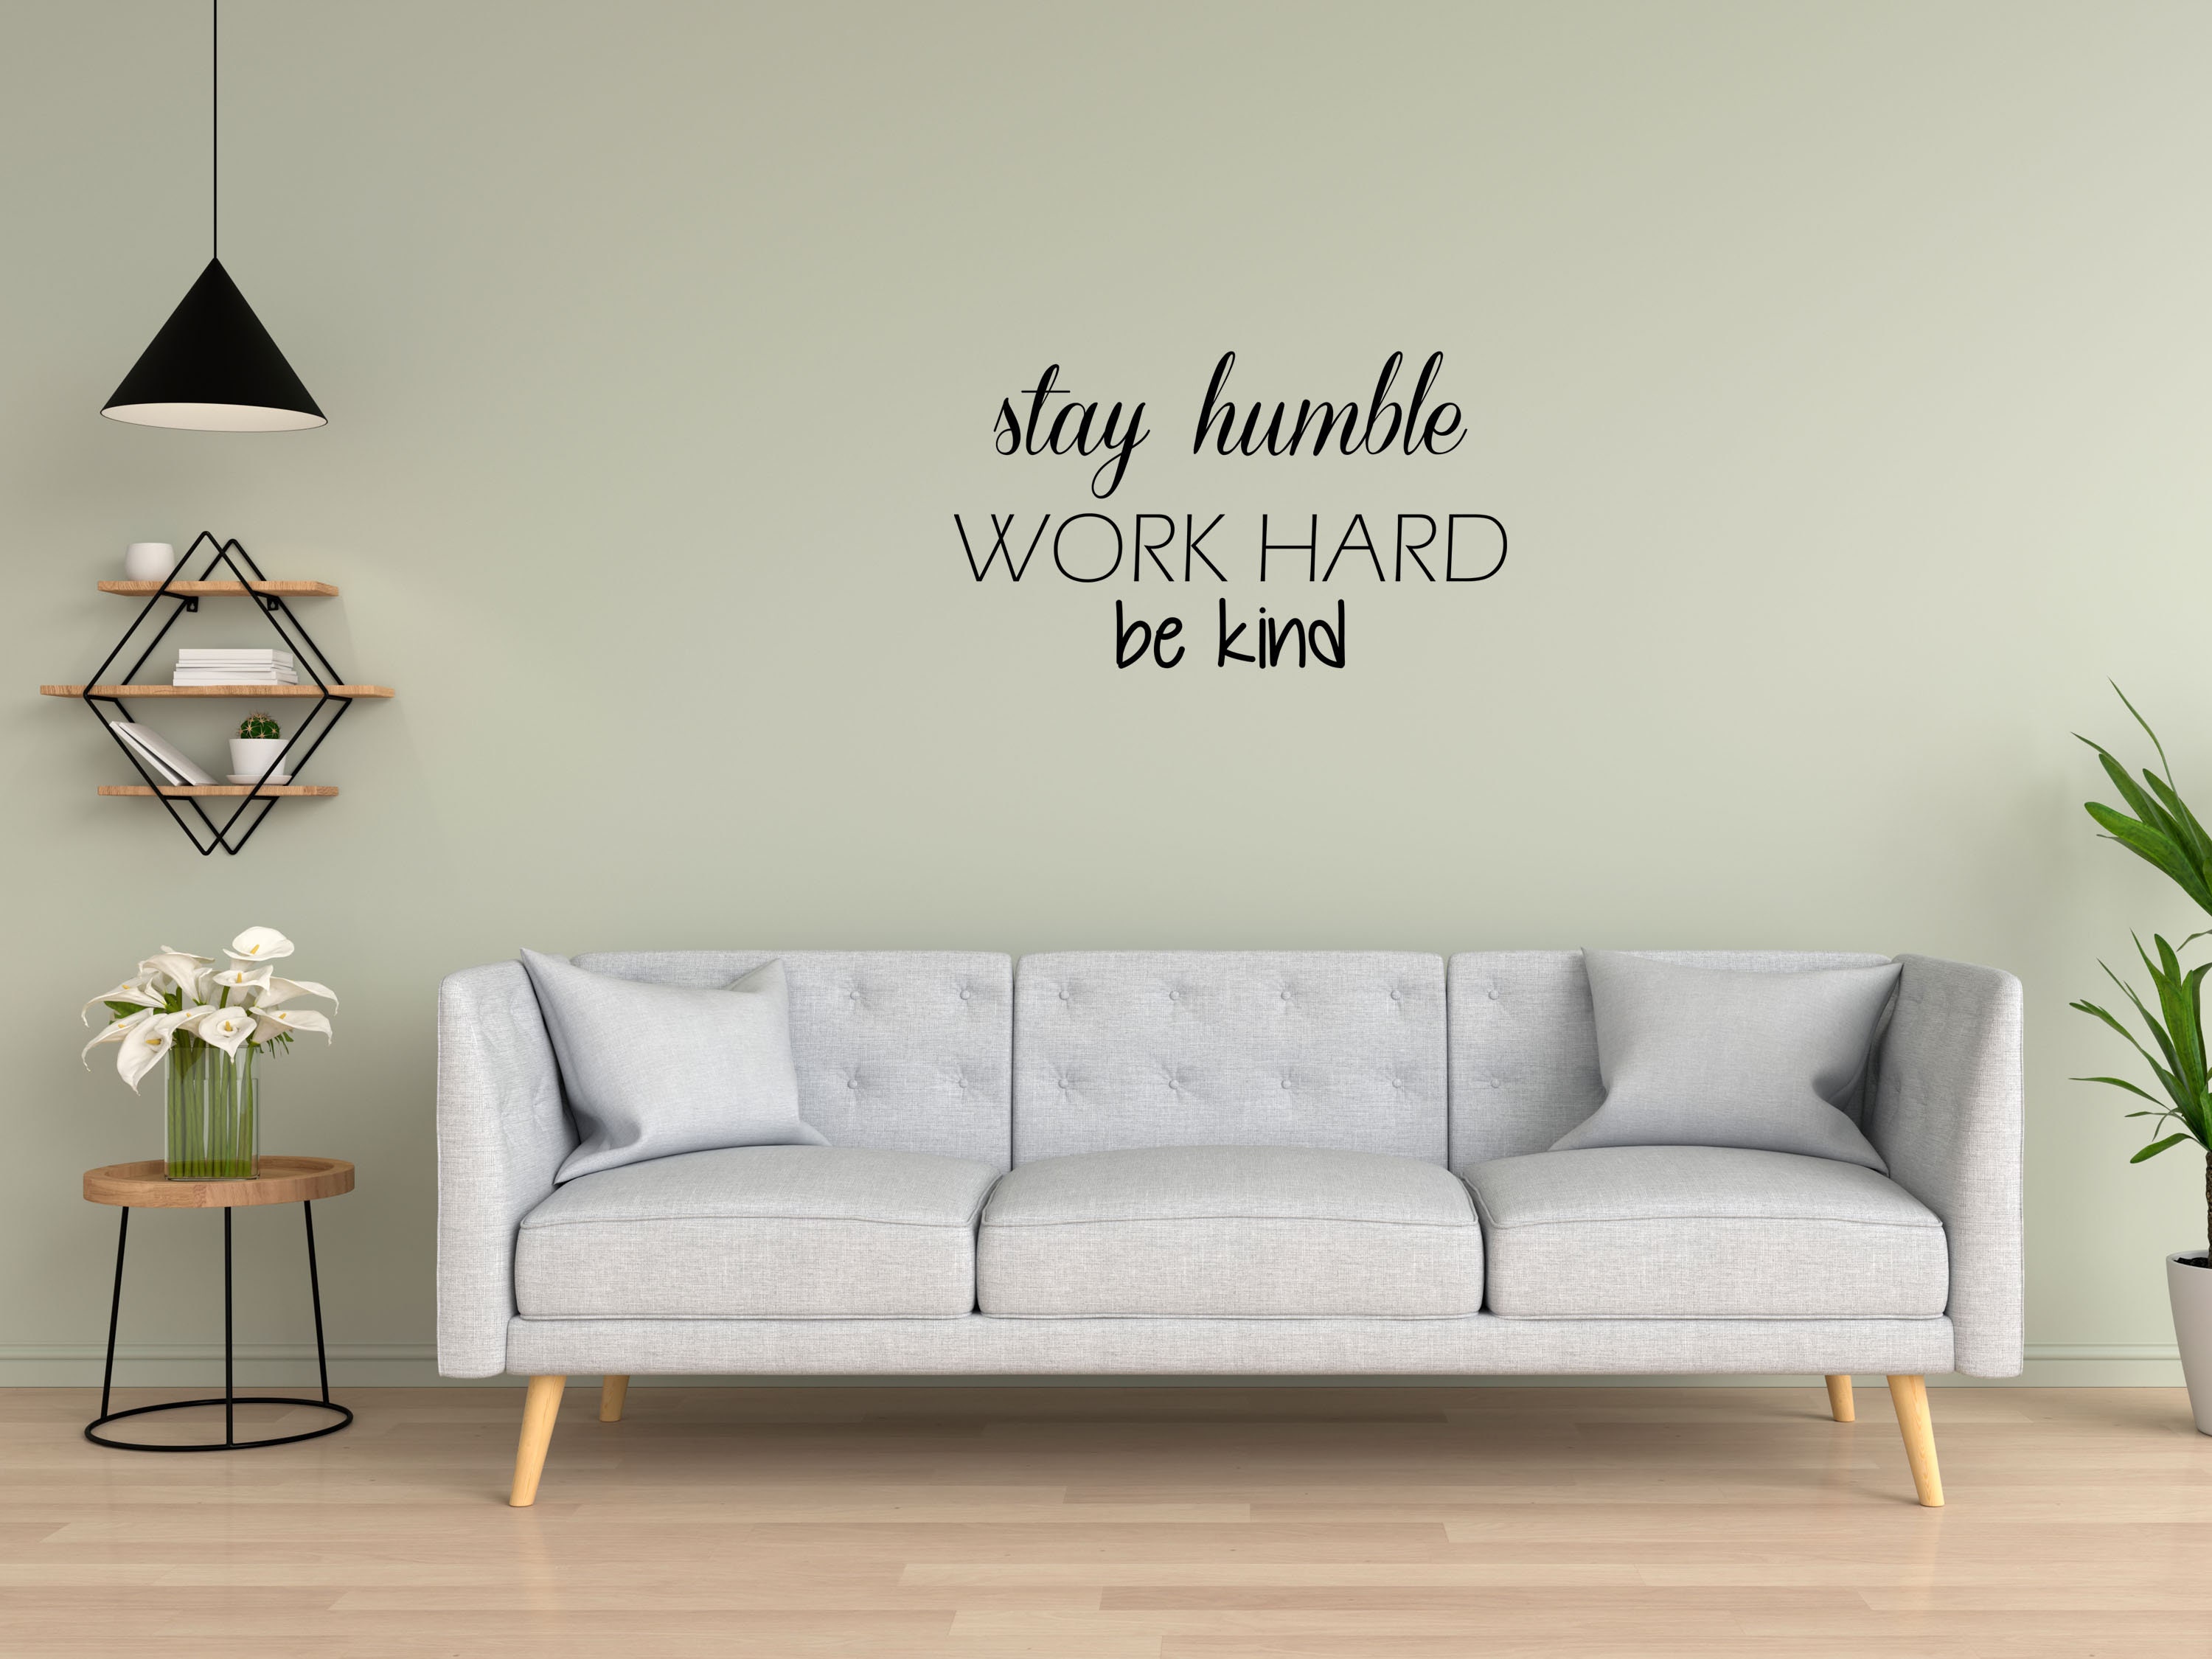 Work Hard Stay Humble Quote Vinyl Wall Decals Decor Sticker Removable Waterproof